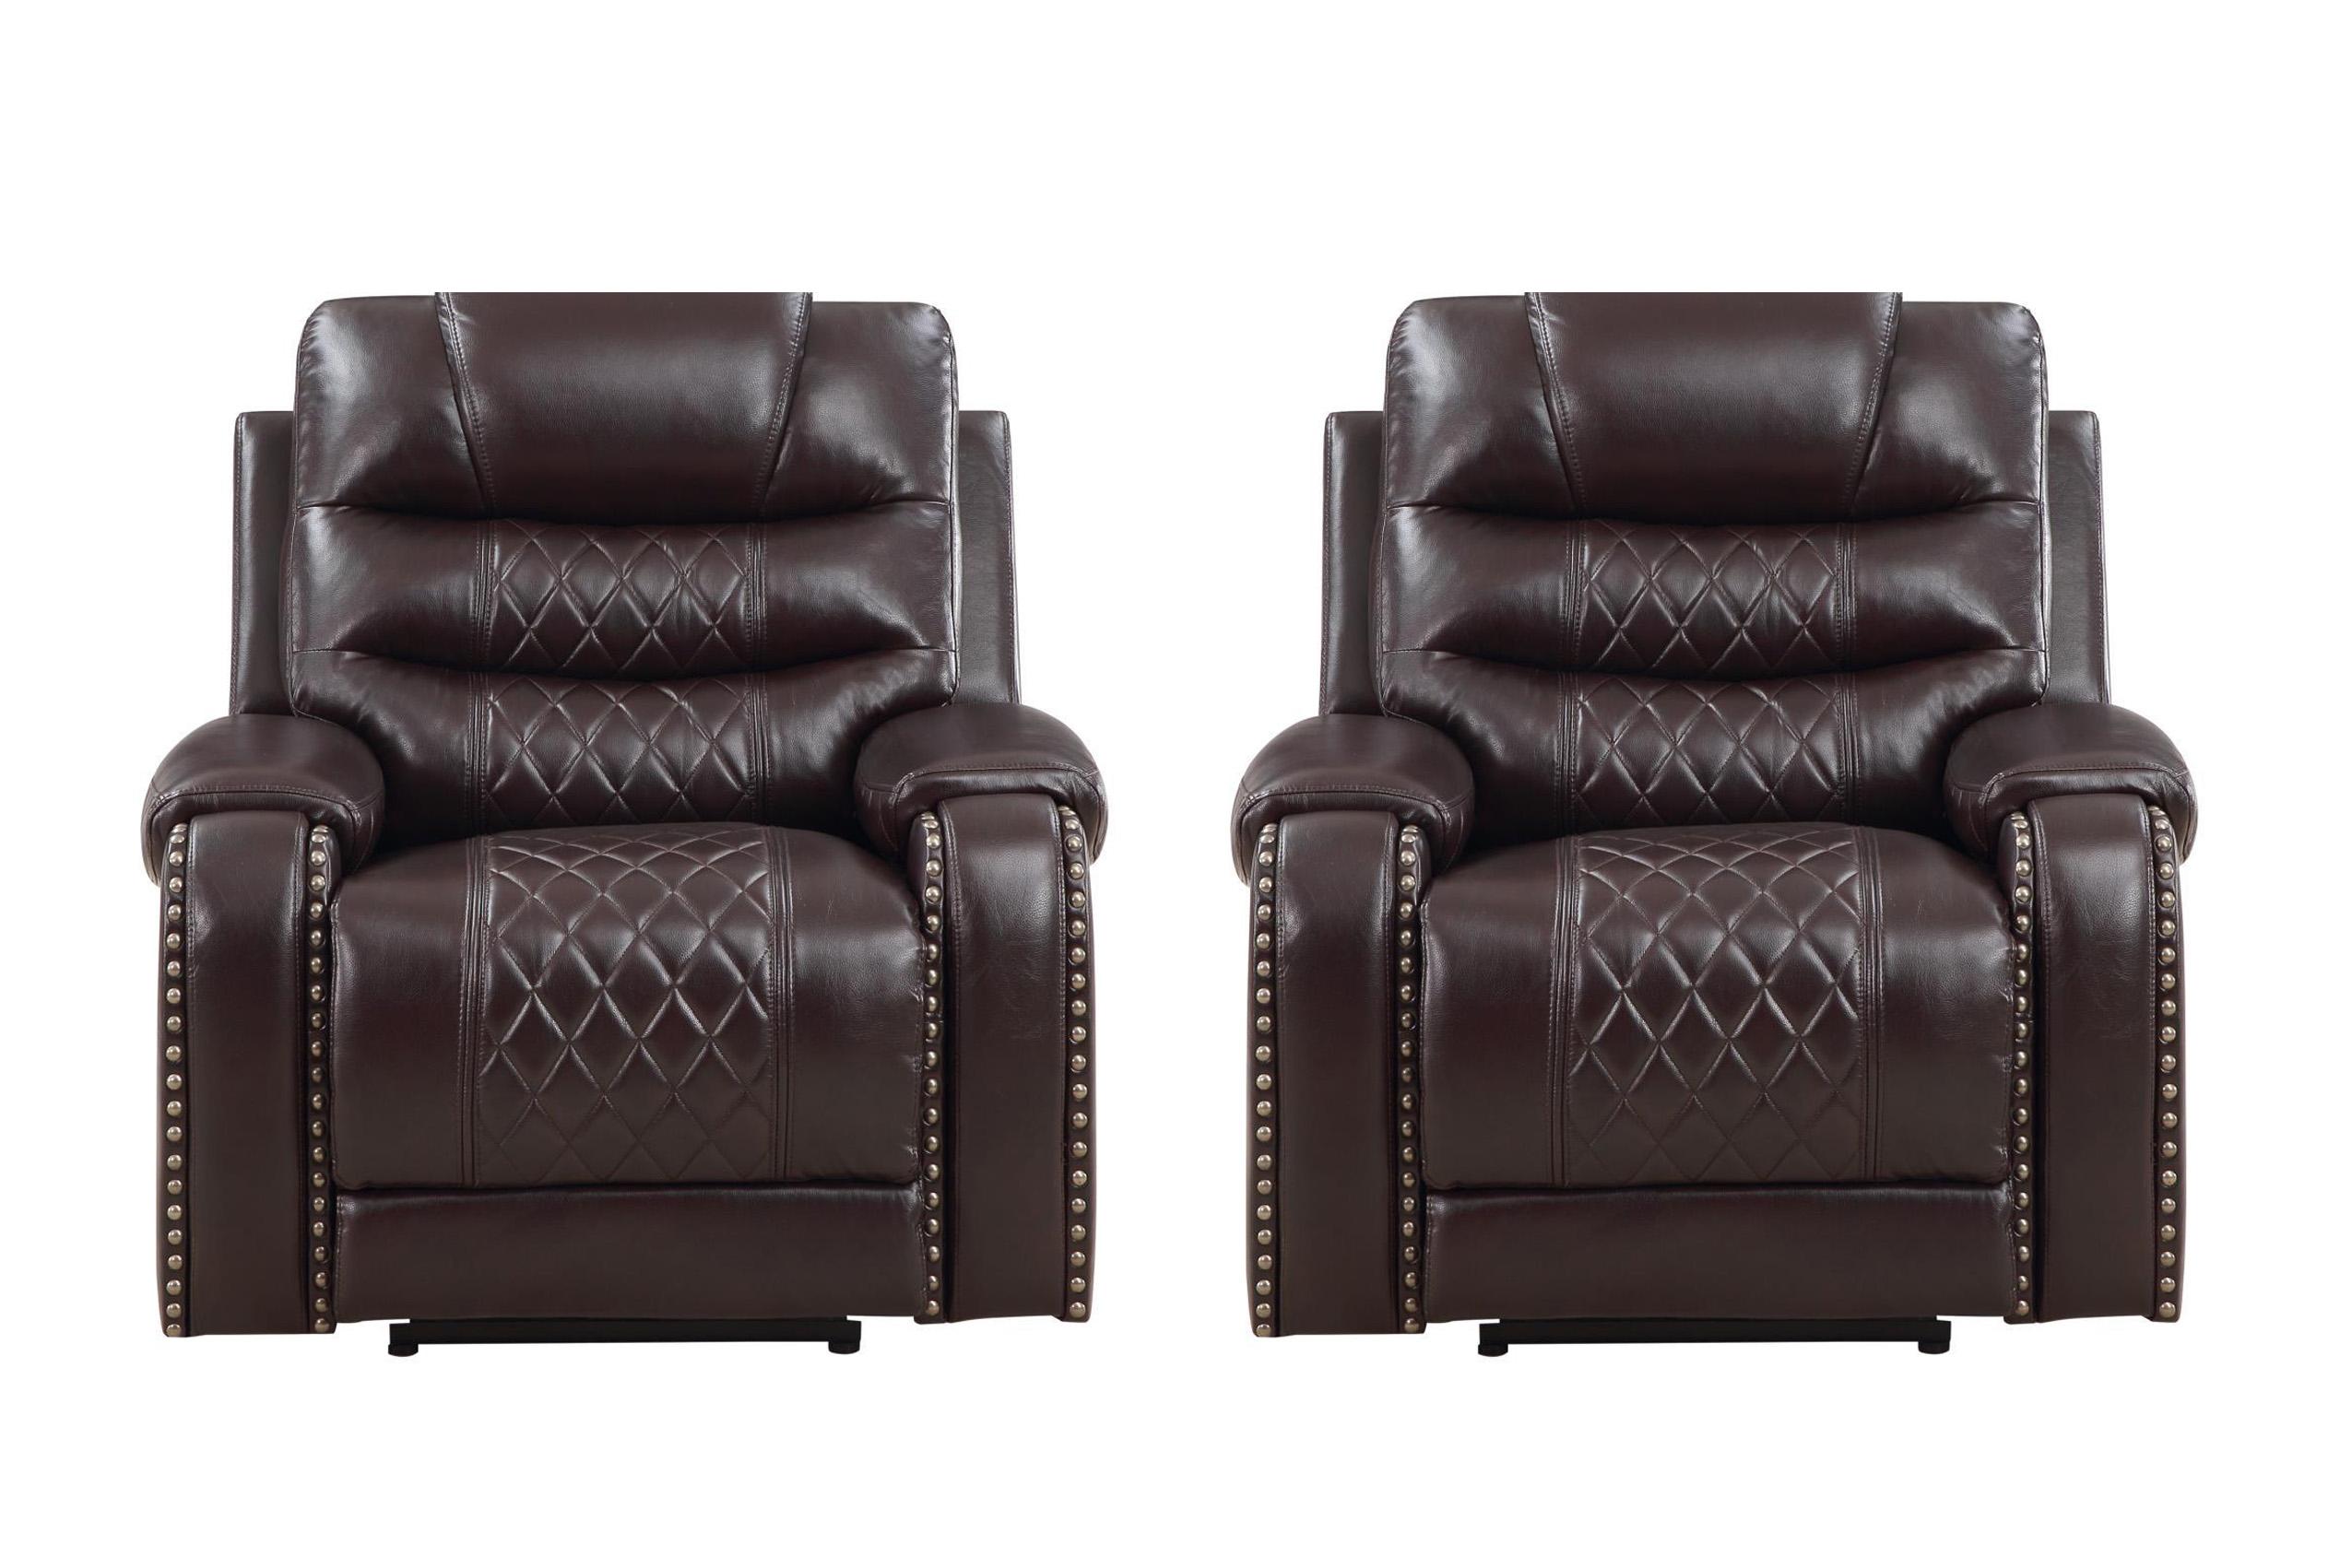 Contemporary, Modern Recliner Chair Set TENNESSEE-BR TENNESSEE-BR-CH-Set-2 in Espresso Eco Leather